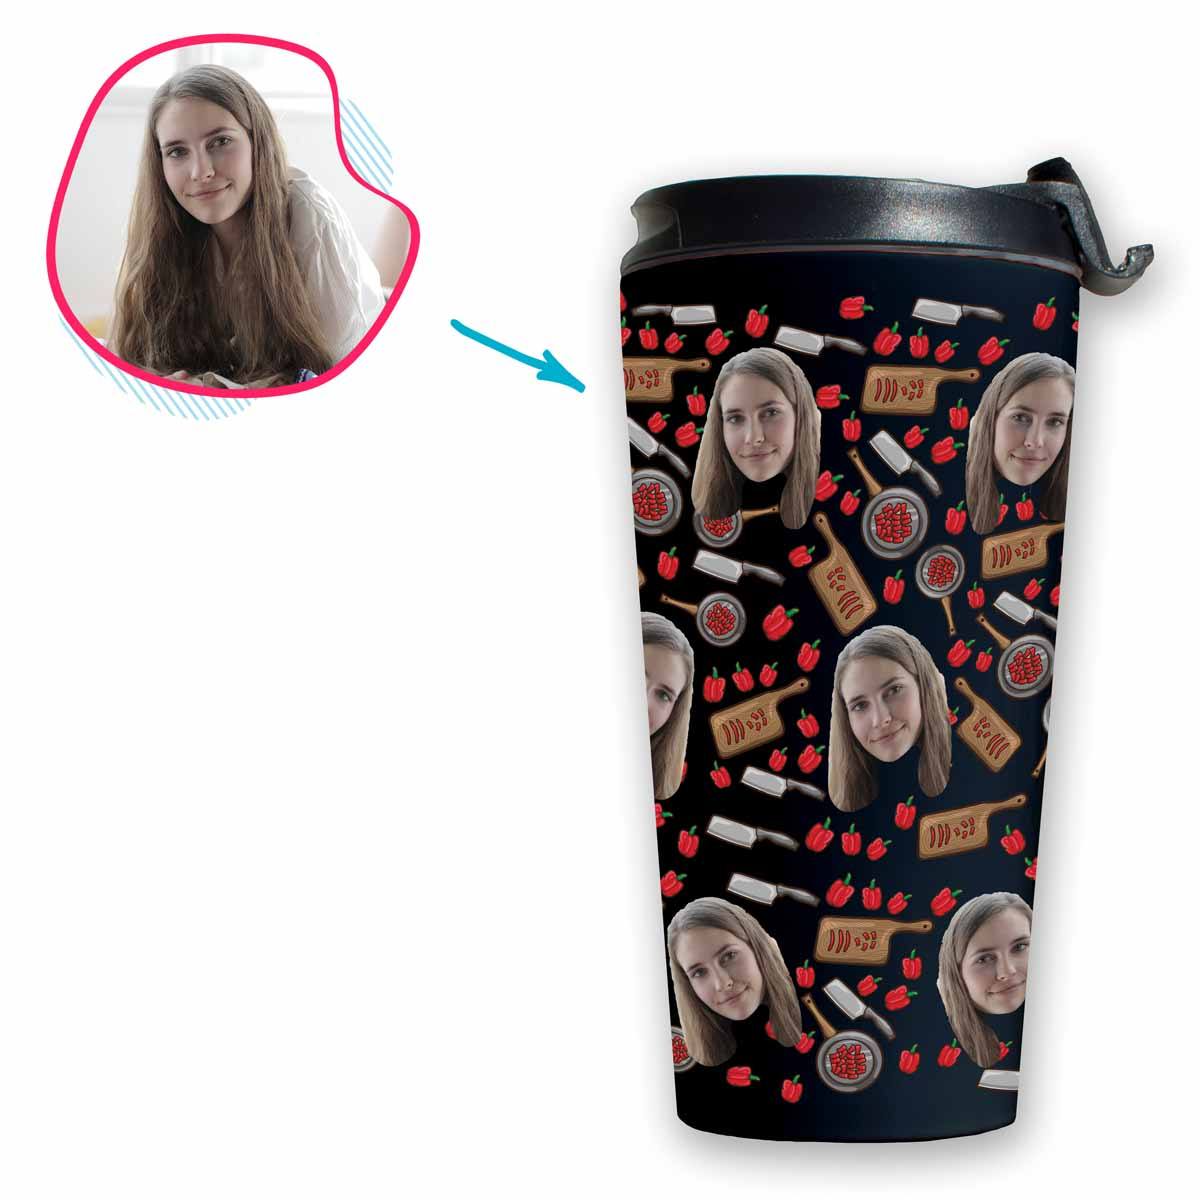 dark Сooking travel mug personalized with photo of face printed on it